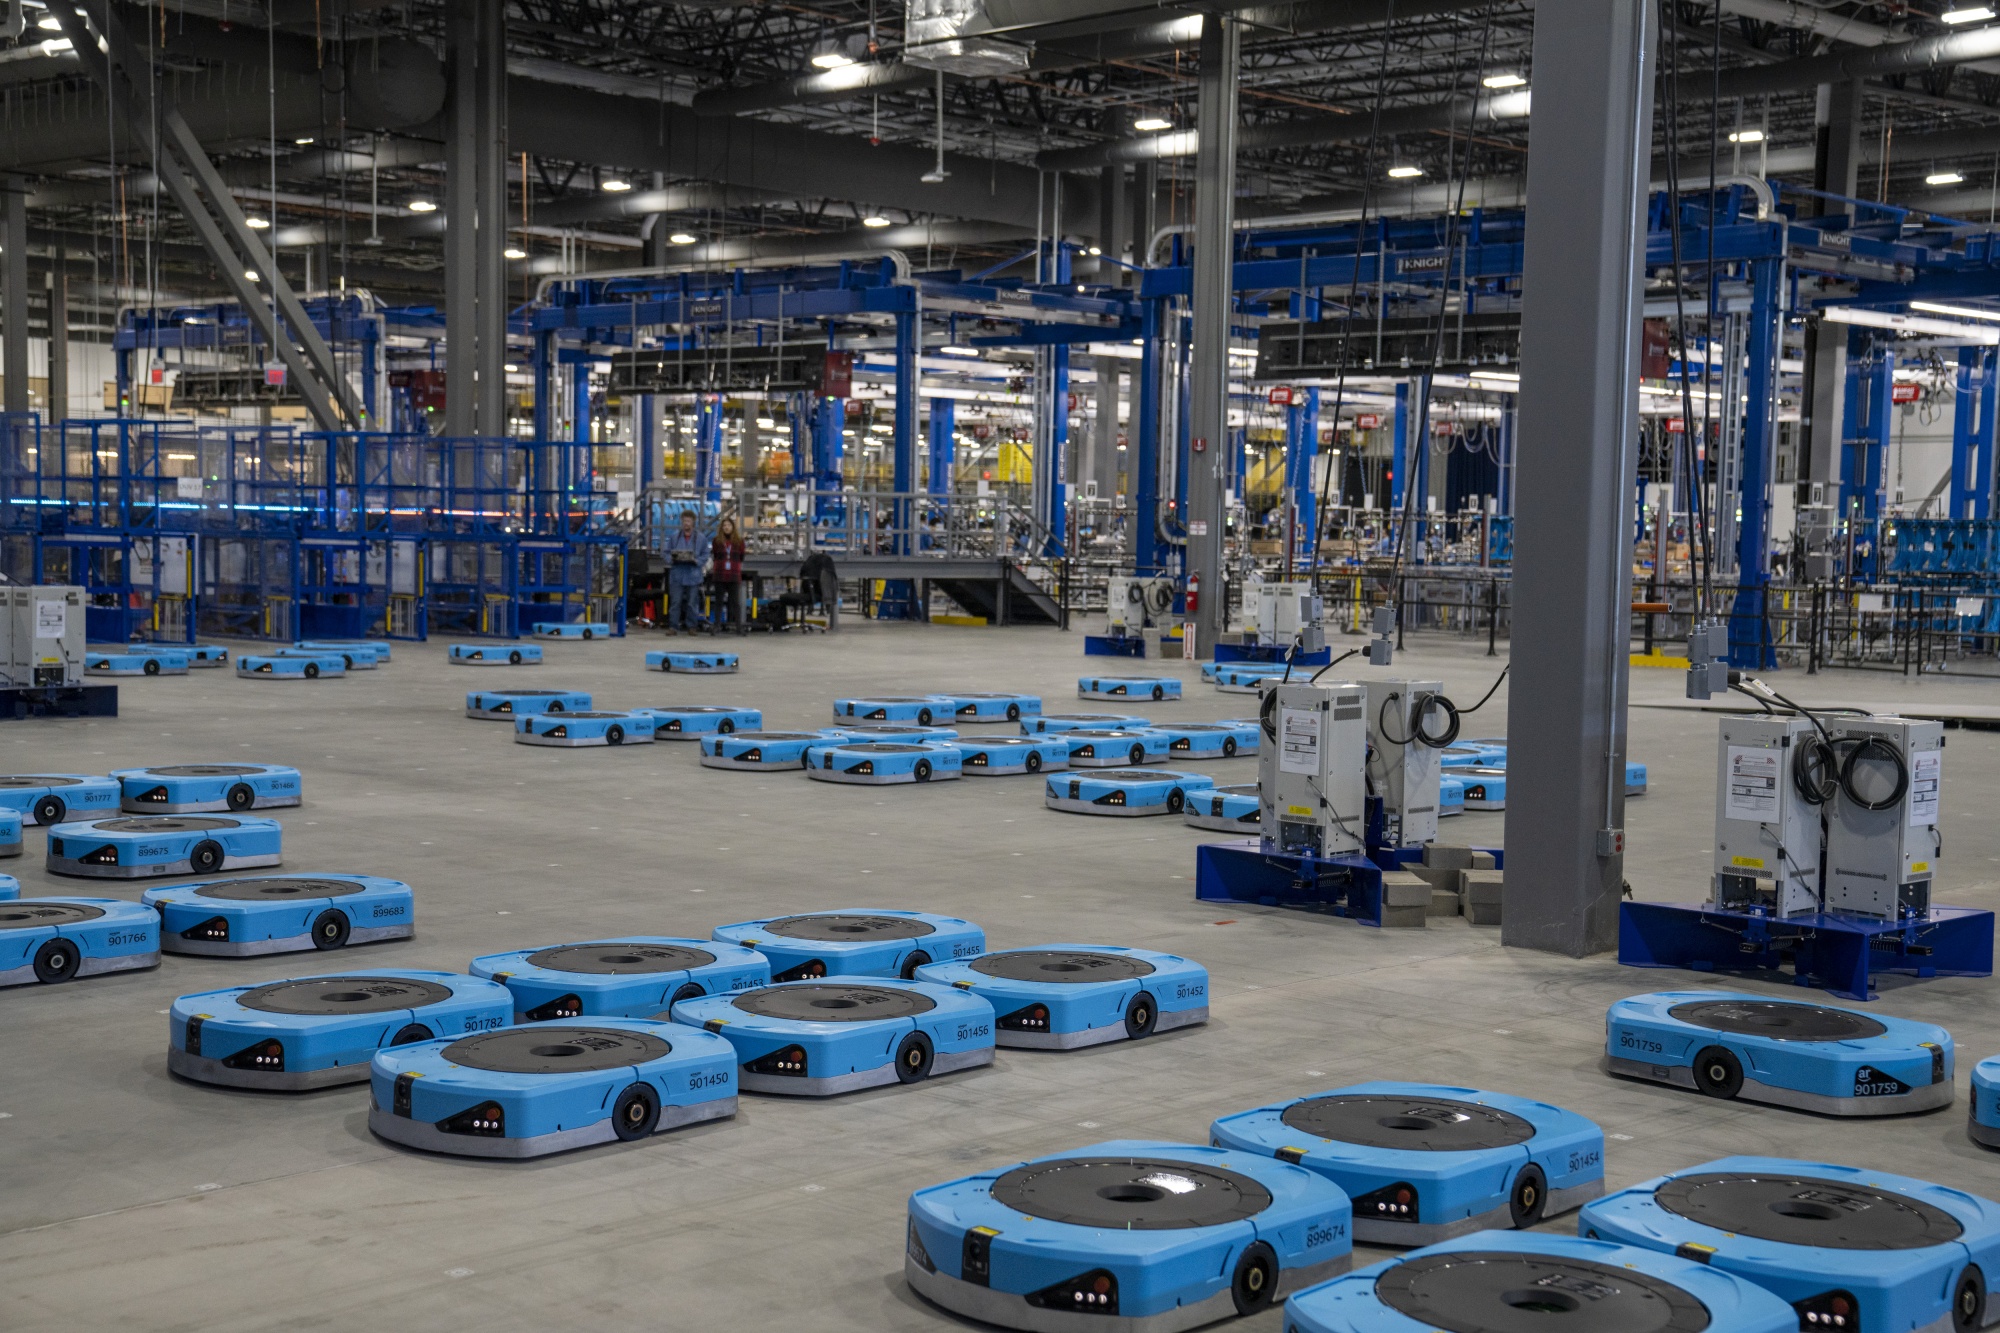 s New Robots Are Rolling Out an Automation Revolution